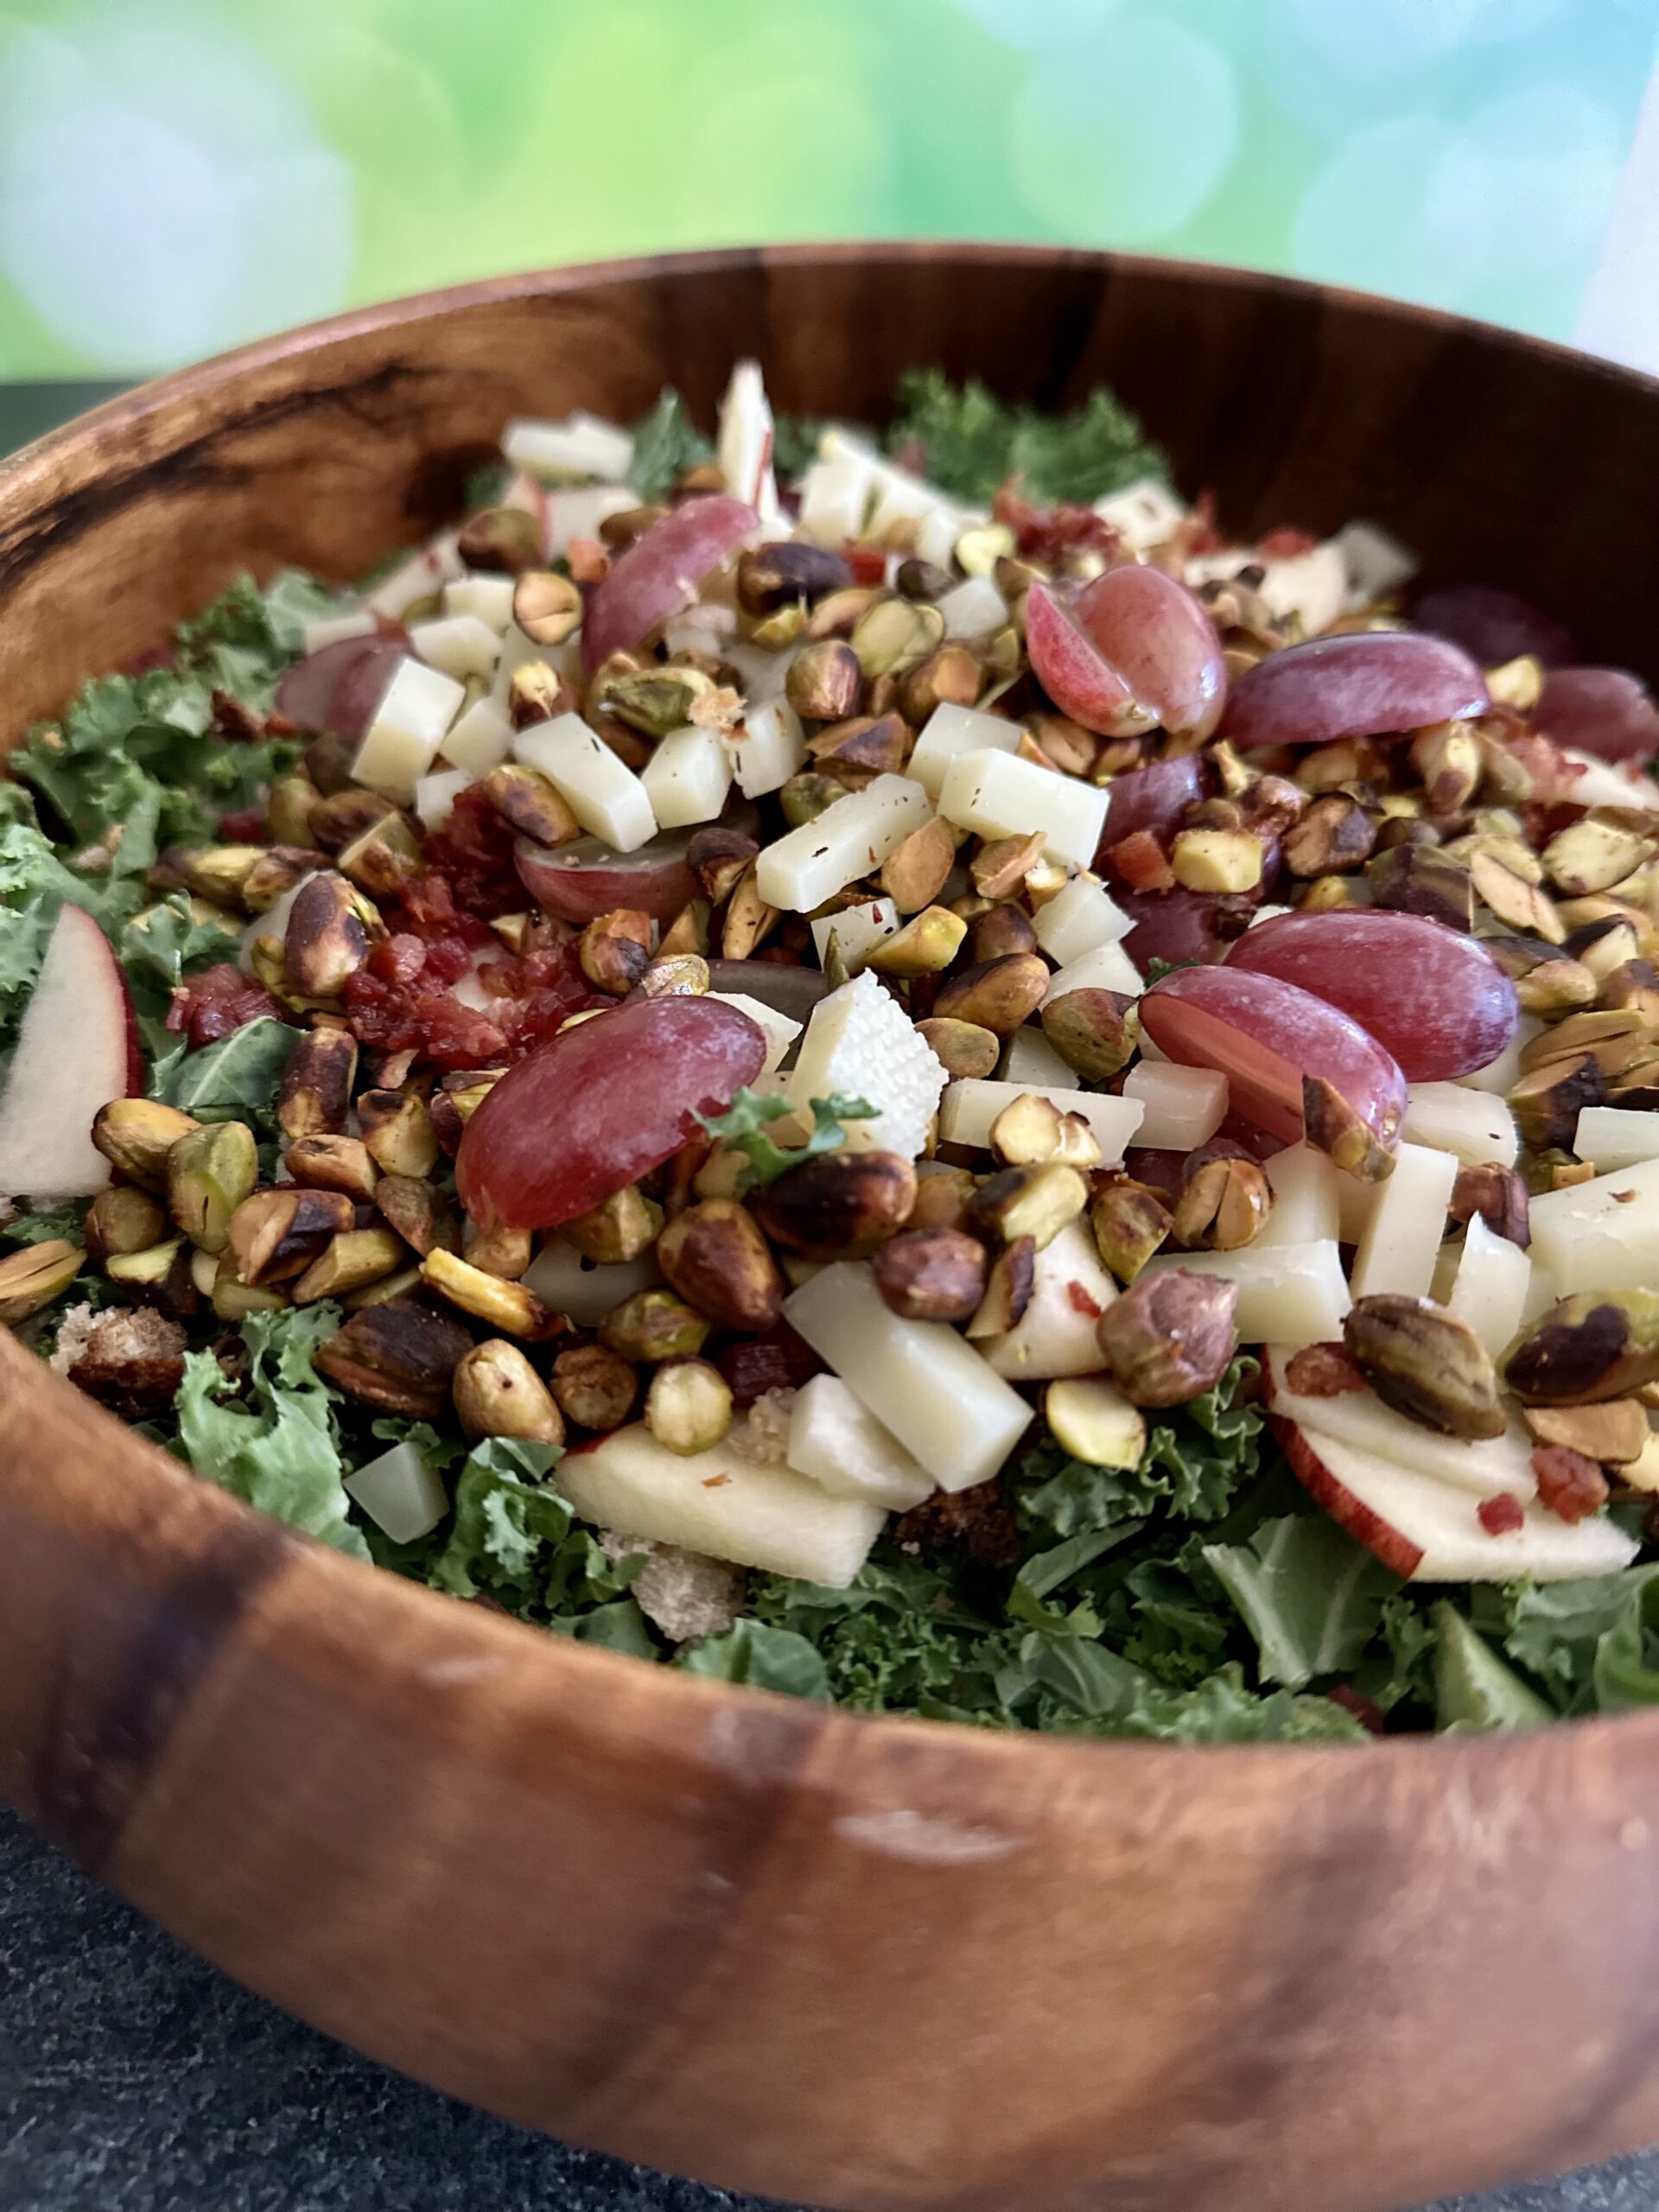 This Tuscan kale salad recipe is just like what you’ll find at a North Italia restaurant.